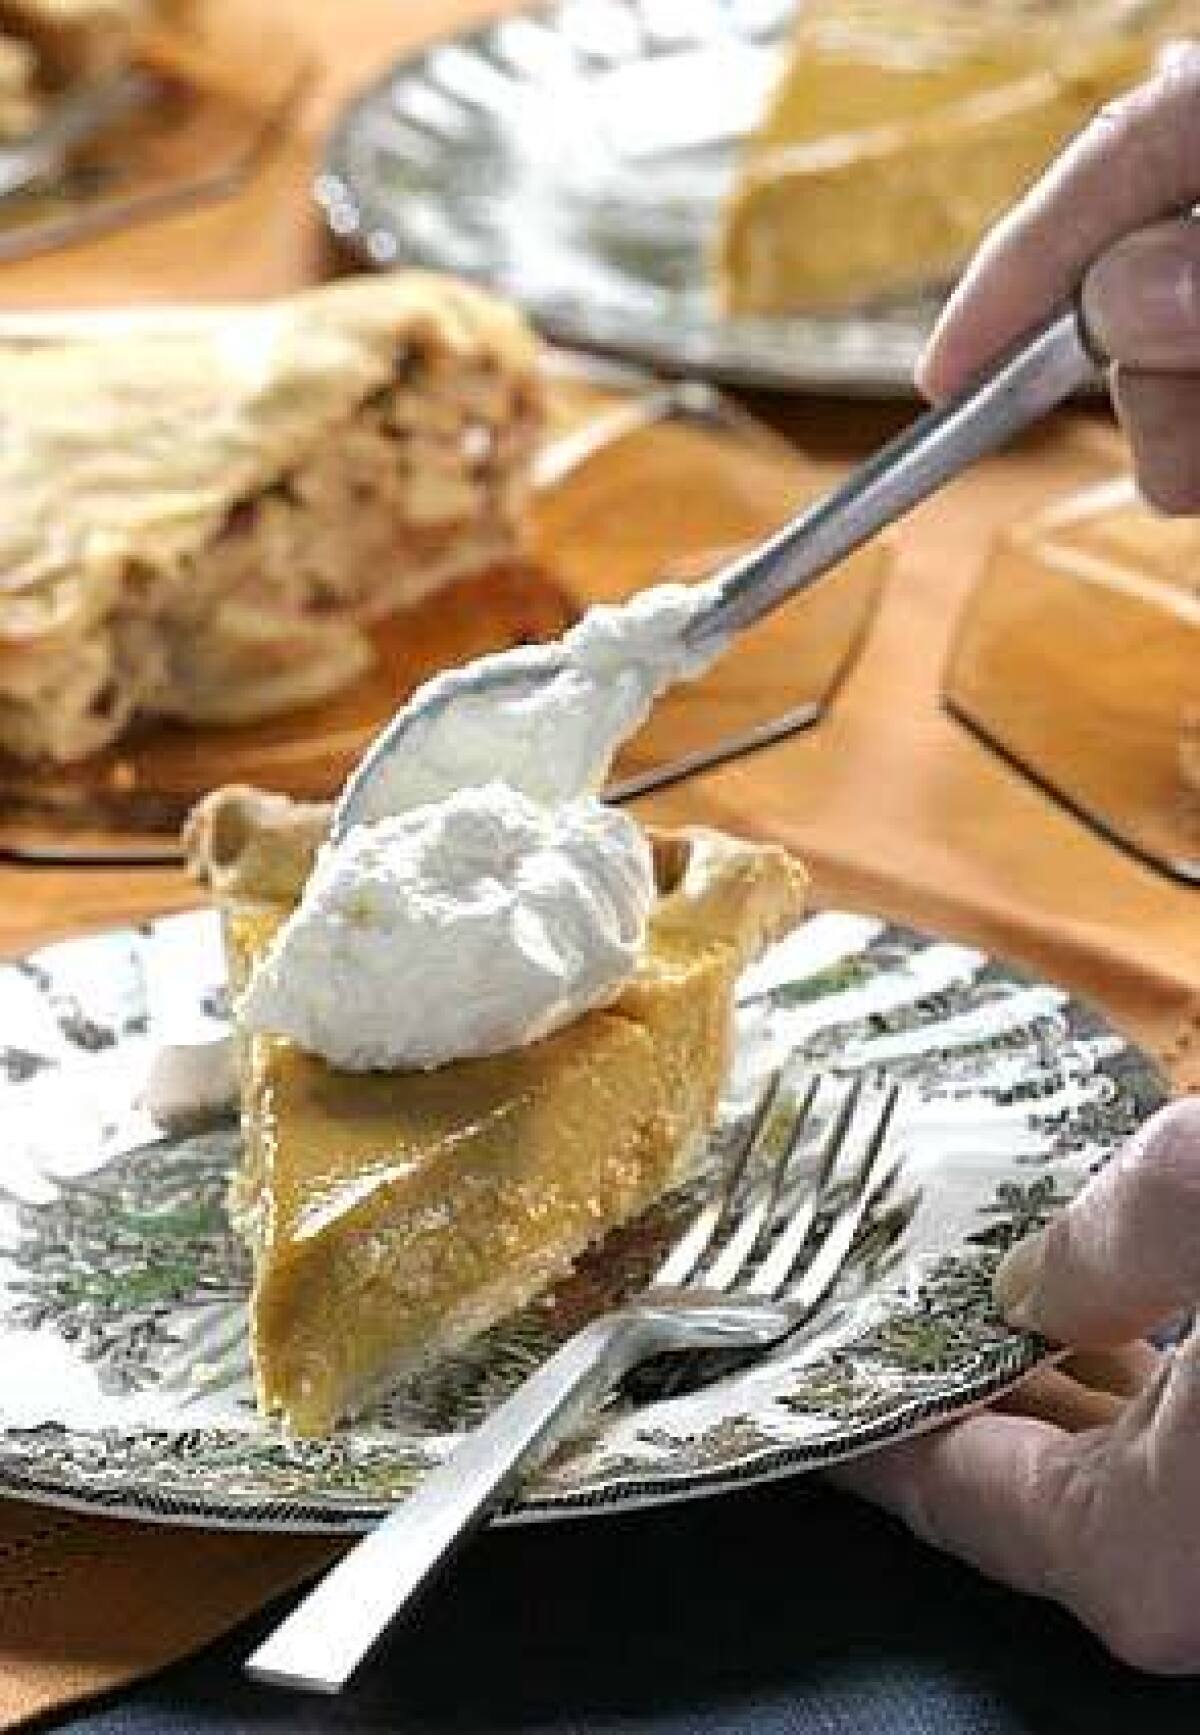 You can chill the crust overnight, but apple and pumpkin pies are best the day theyre made.